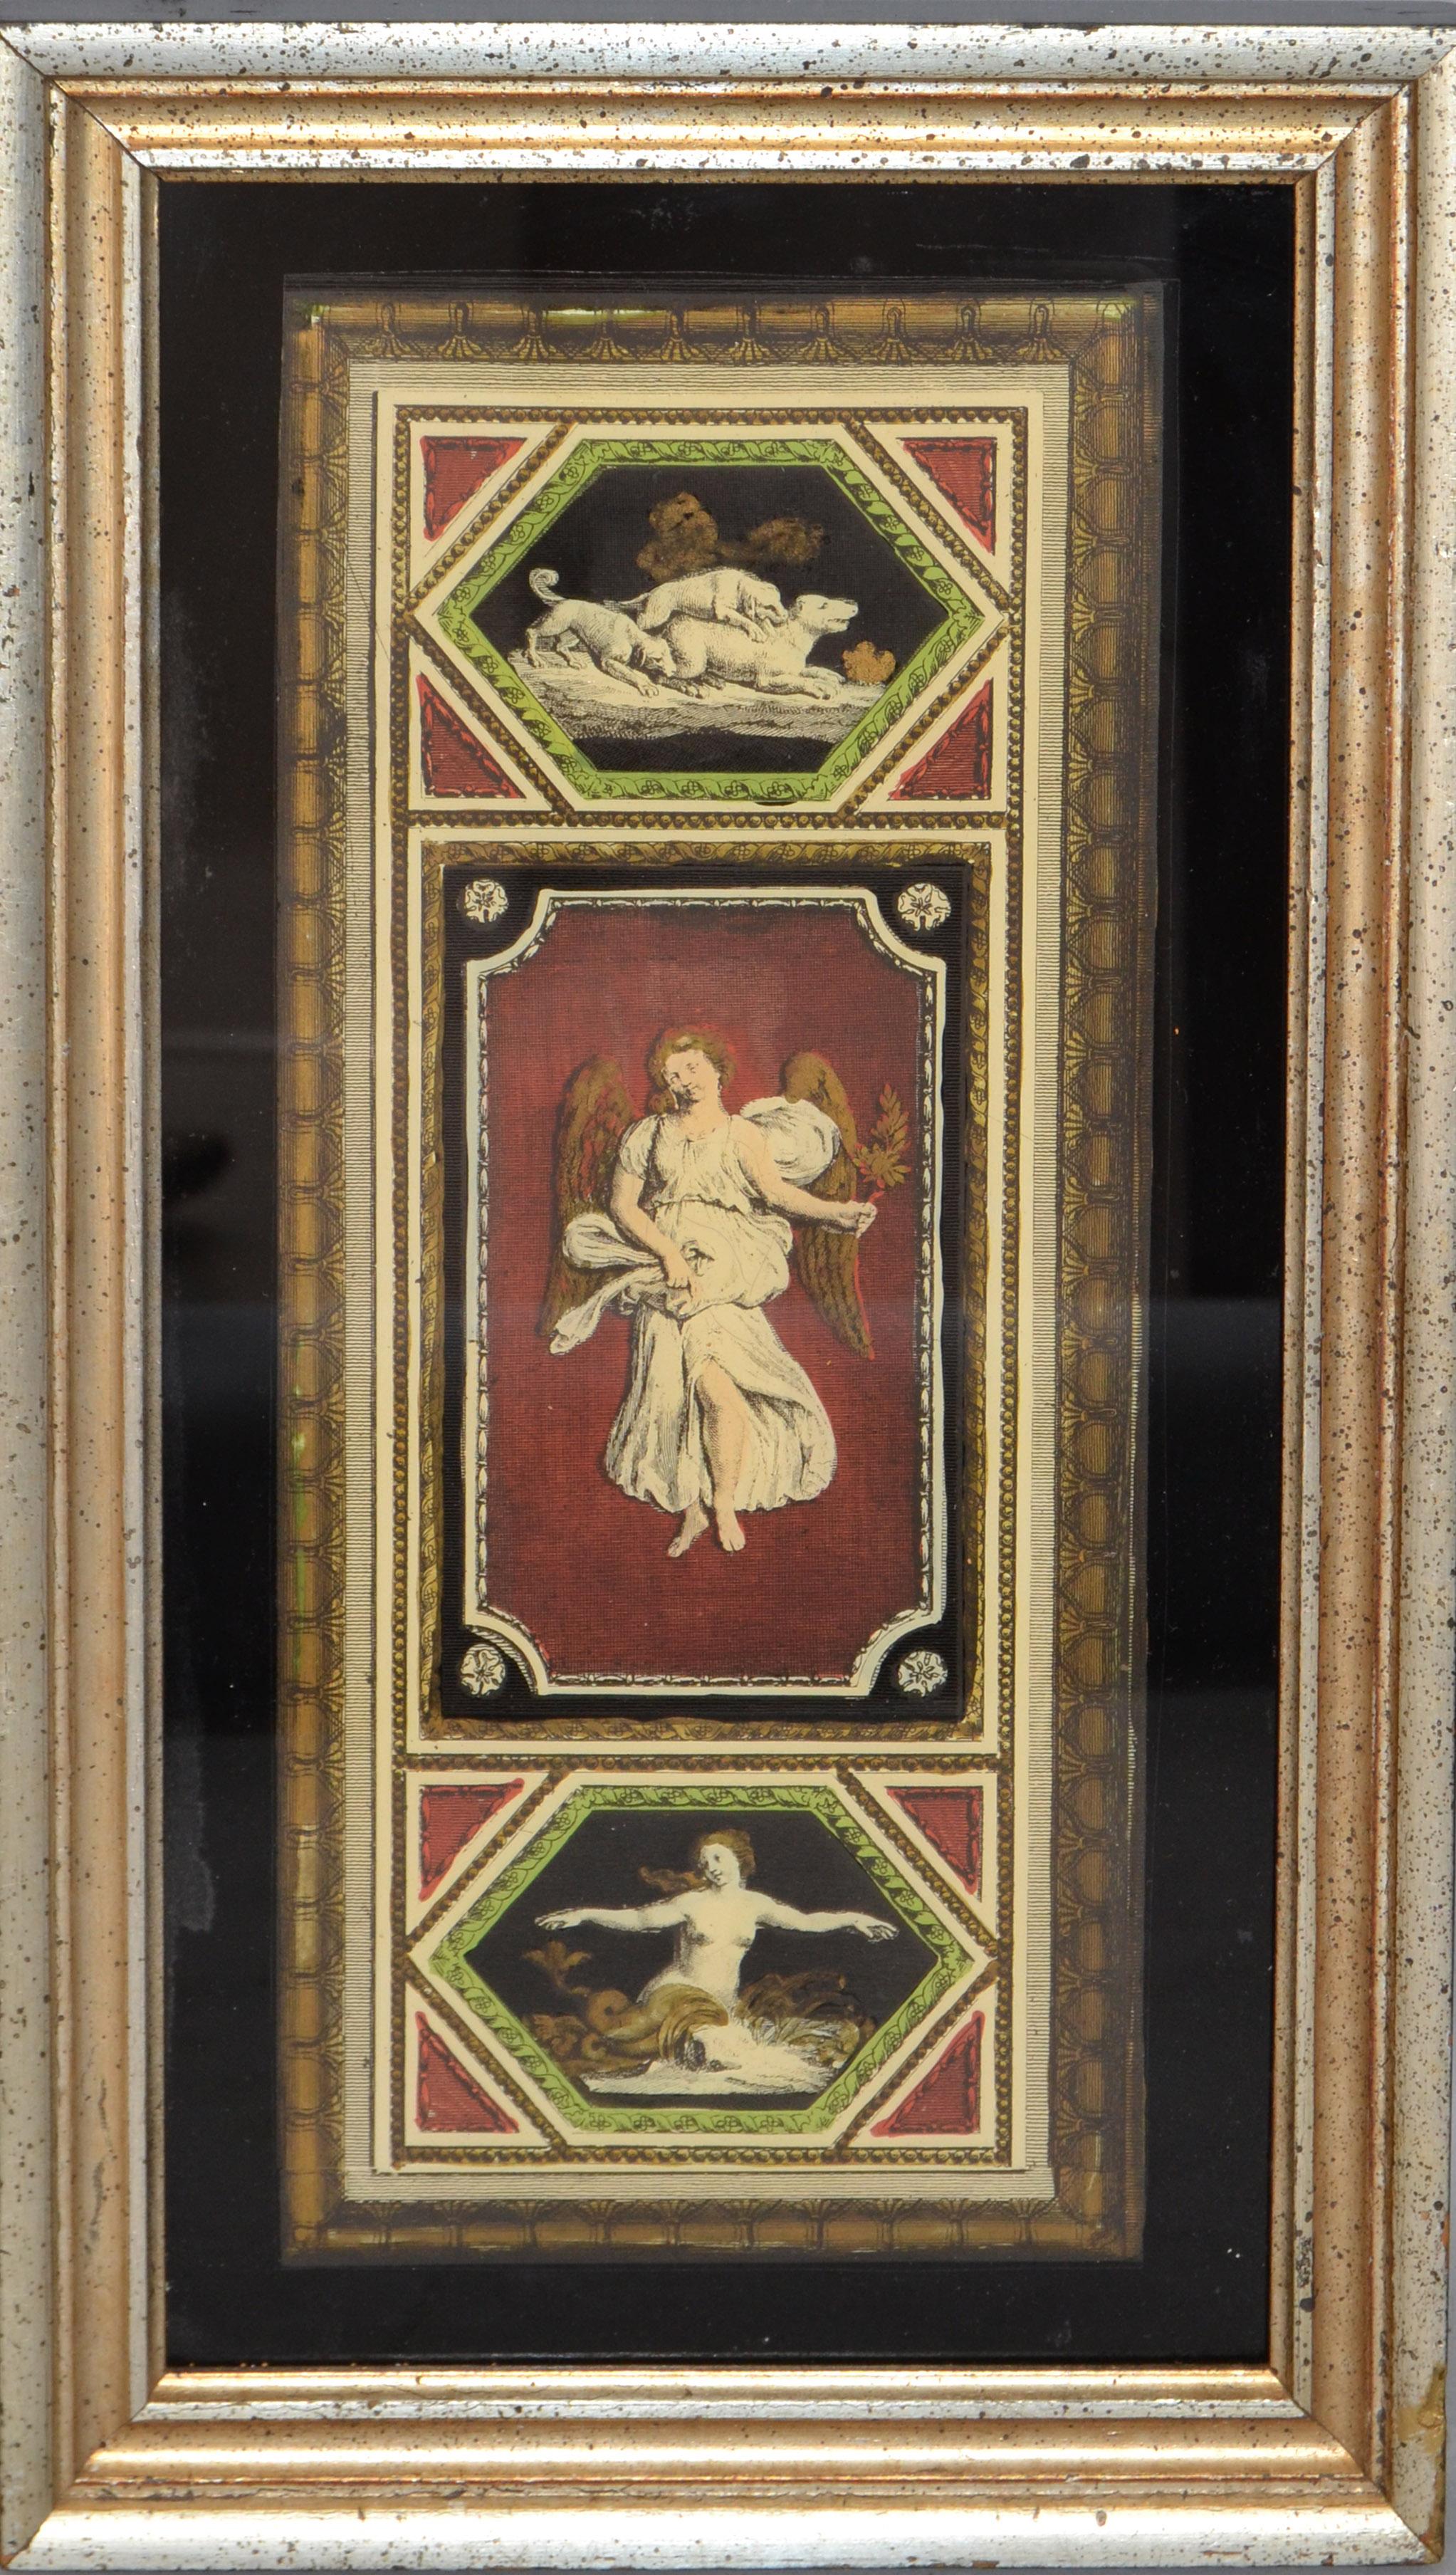 Hand framed and encased Florentine Fine Art depicting 3 Dogs, Angel and a Nude Woman. 
Backing supports a secure way of hanging it.
Art Size measures: 5 x 12 inches.